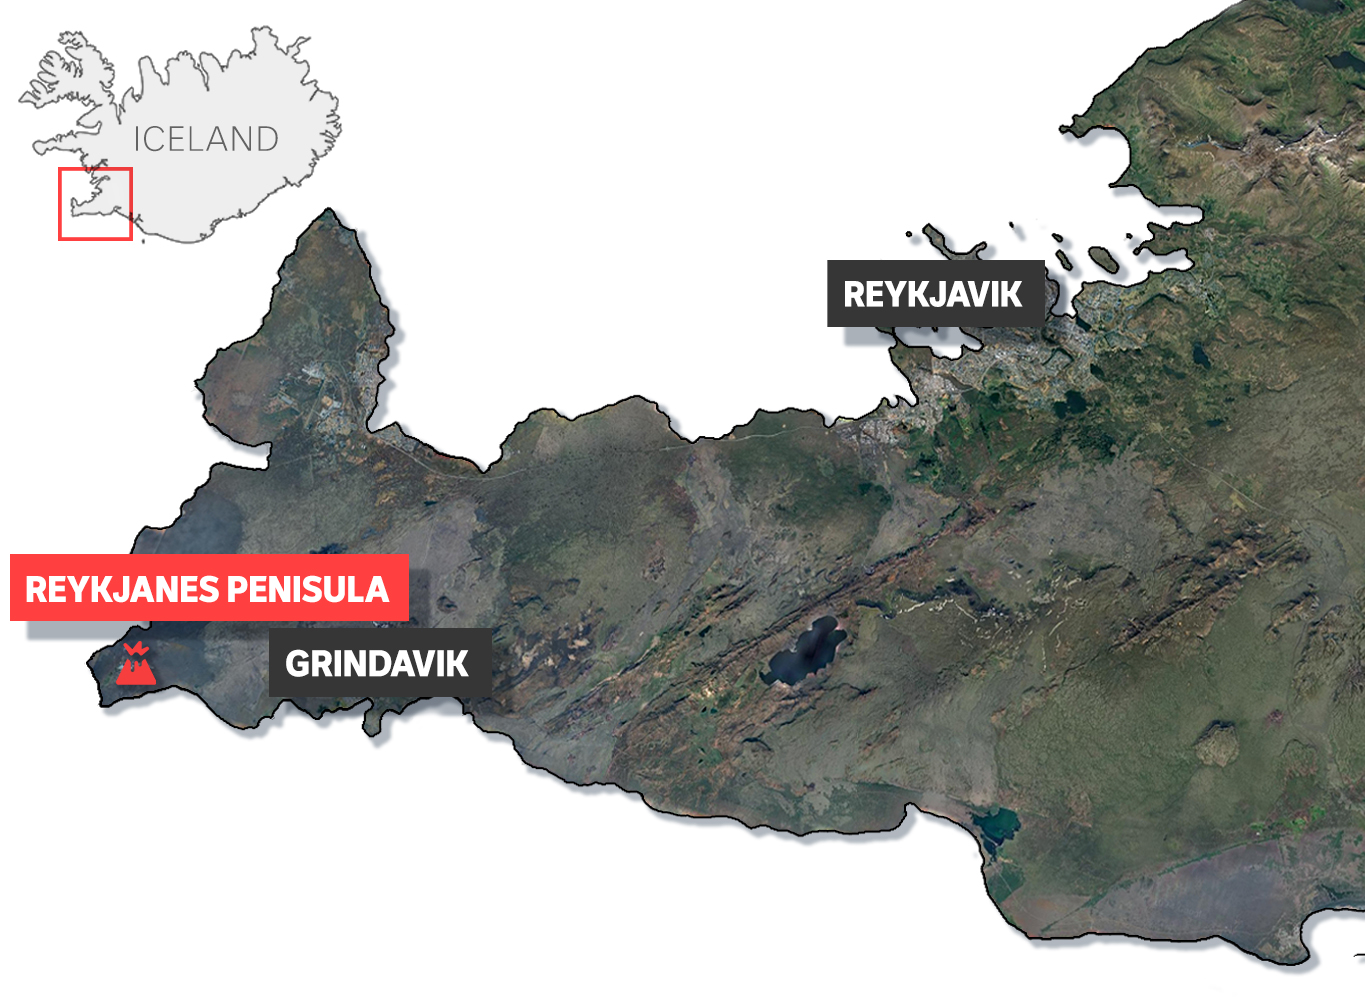 A map showing a peninsula in Iceland the locations of Reykyavik, Grindavid and the Reykjanes Peninsula marked.